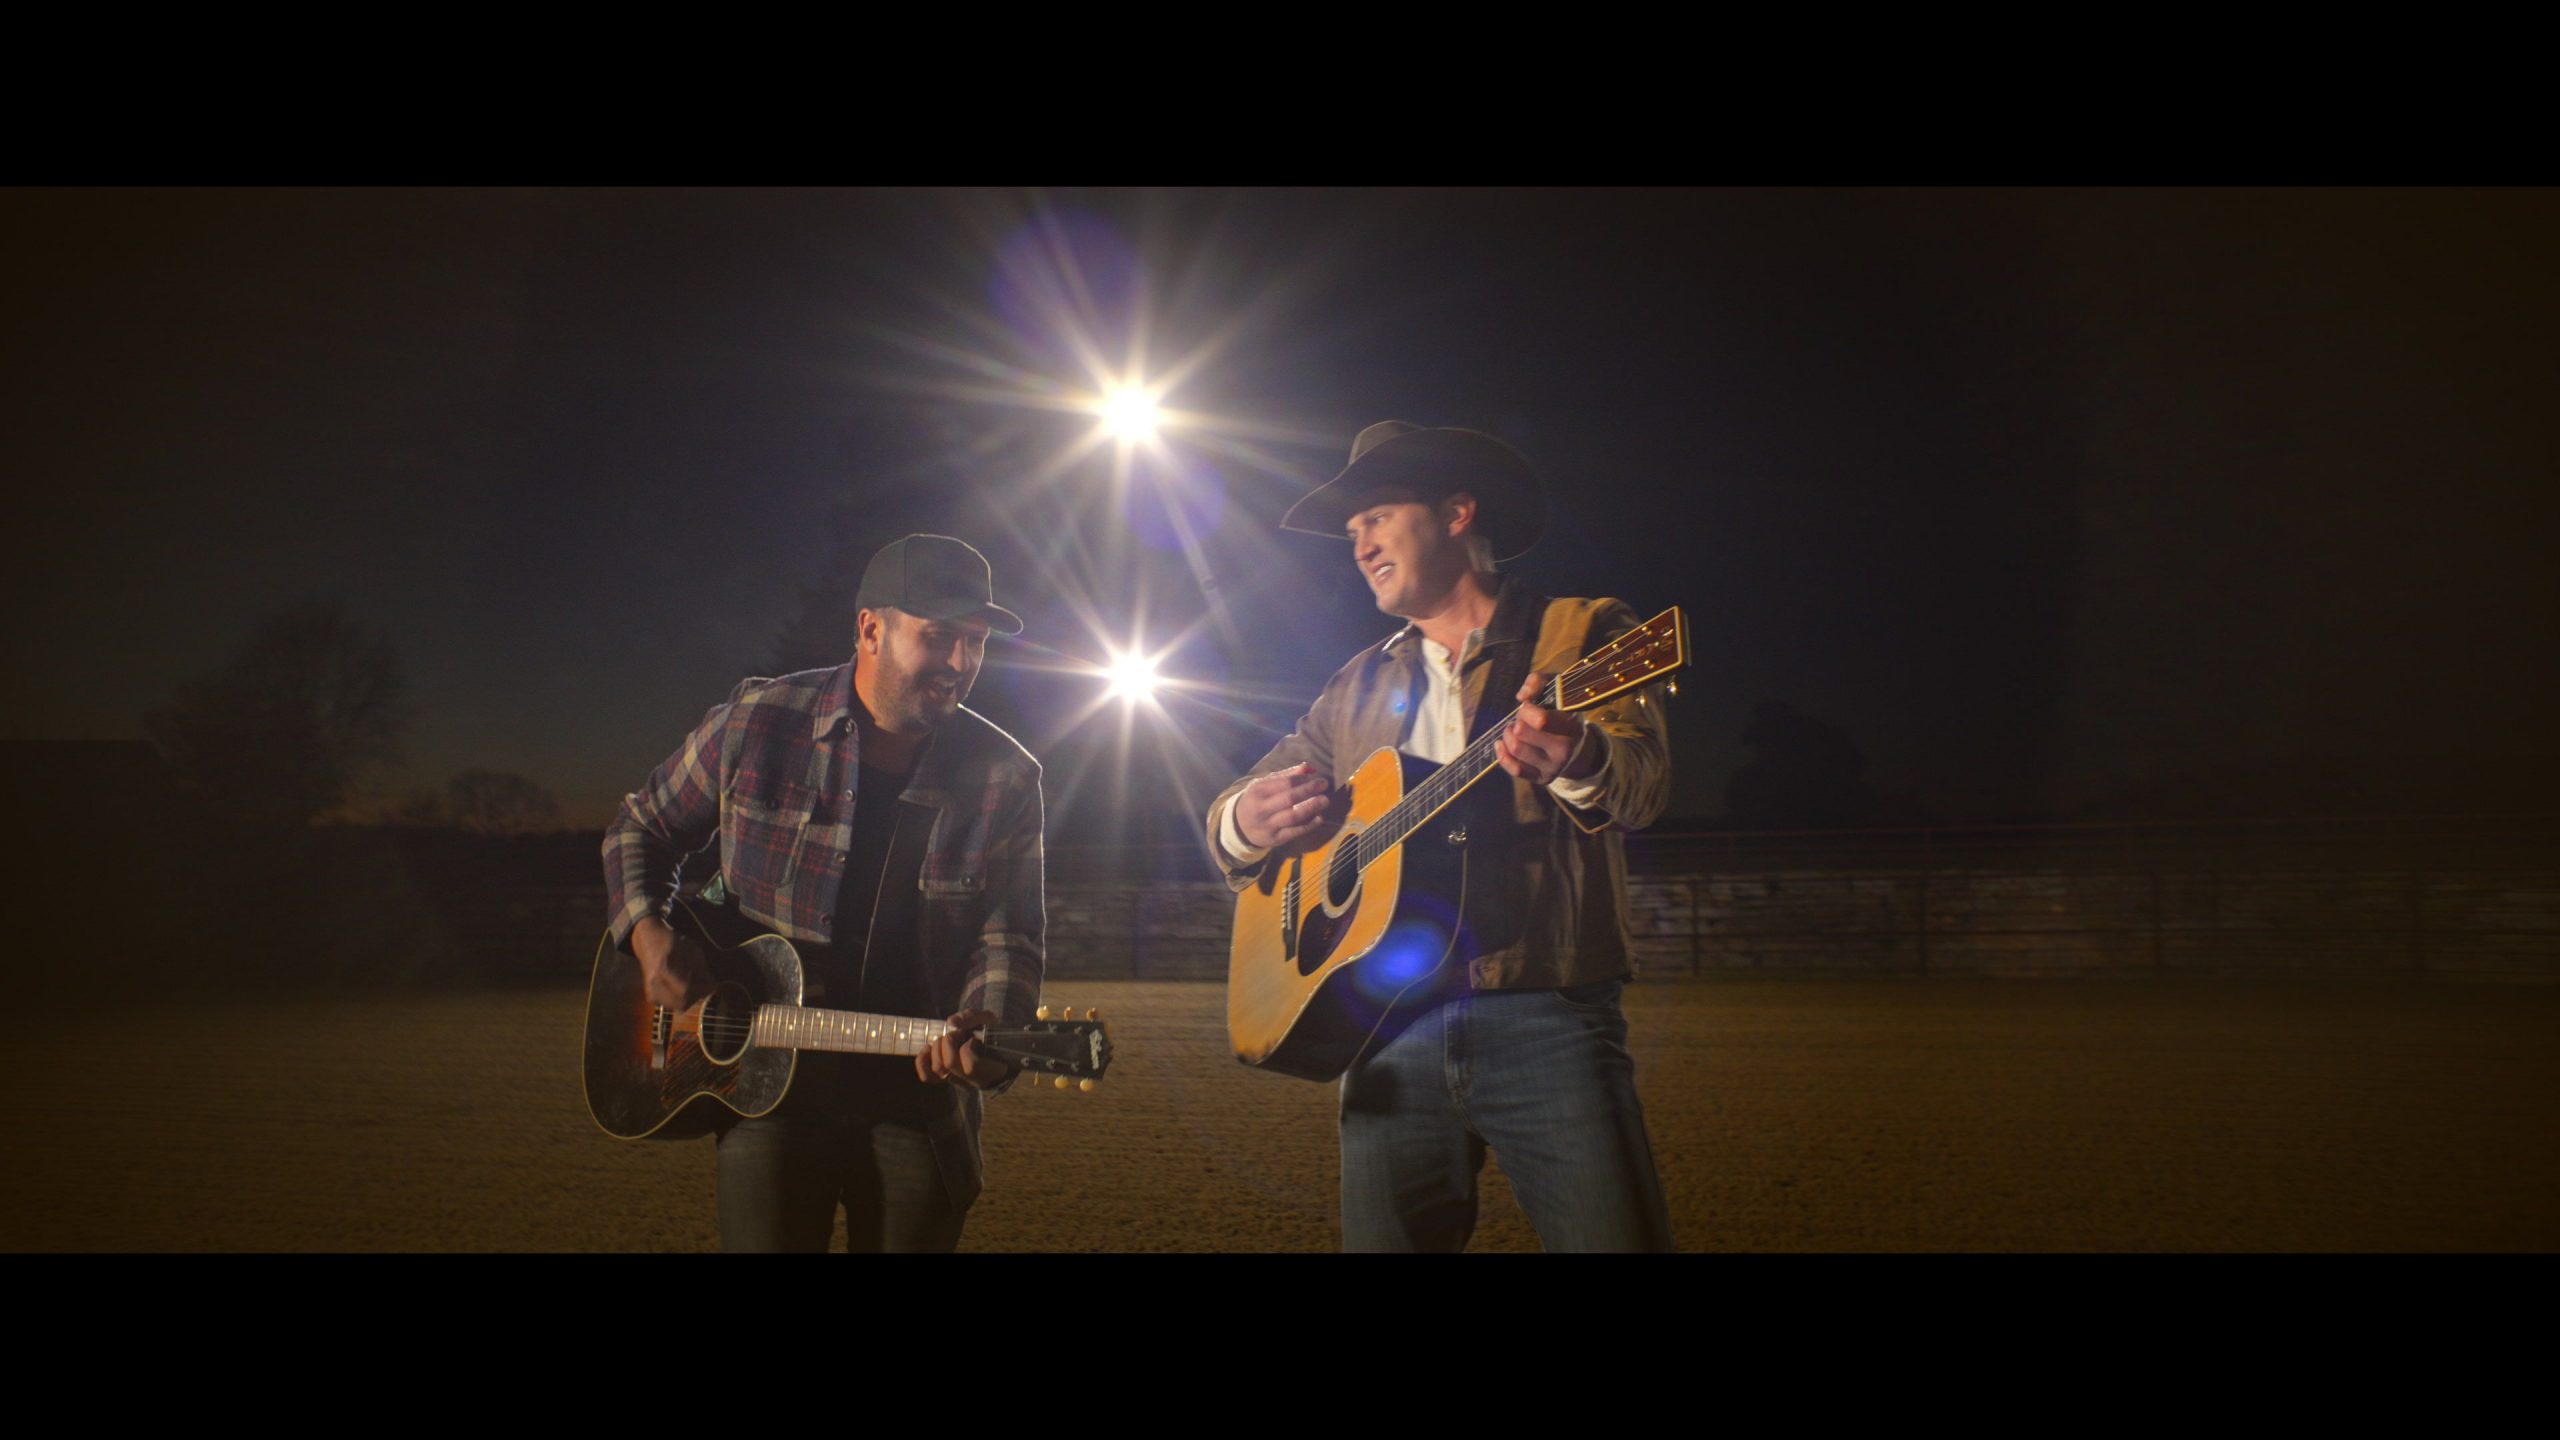 AWARD-WINNING ARTIST JON PARDI AND FIVE-TIME ENTERTAINER OF THE YEAR LUKE BRYAN RELEASE OFFICIAL MUSIC VIDEO FOR “COWBOYS AND PLOWBOYS”